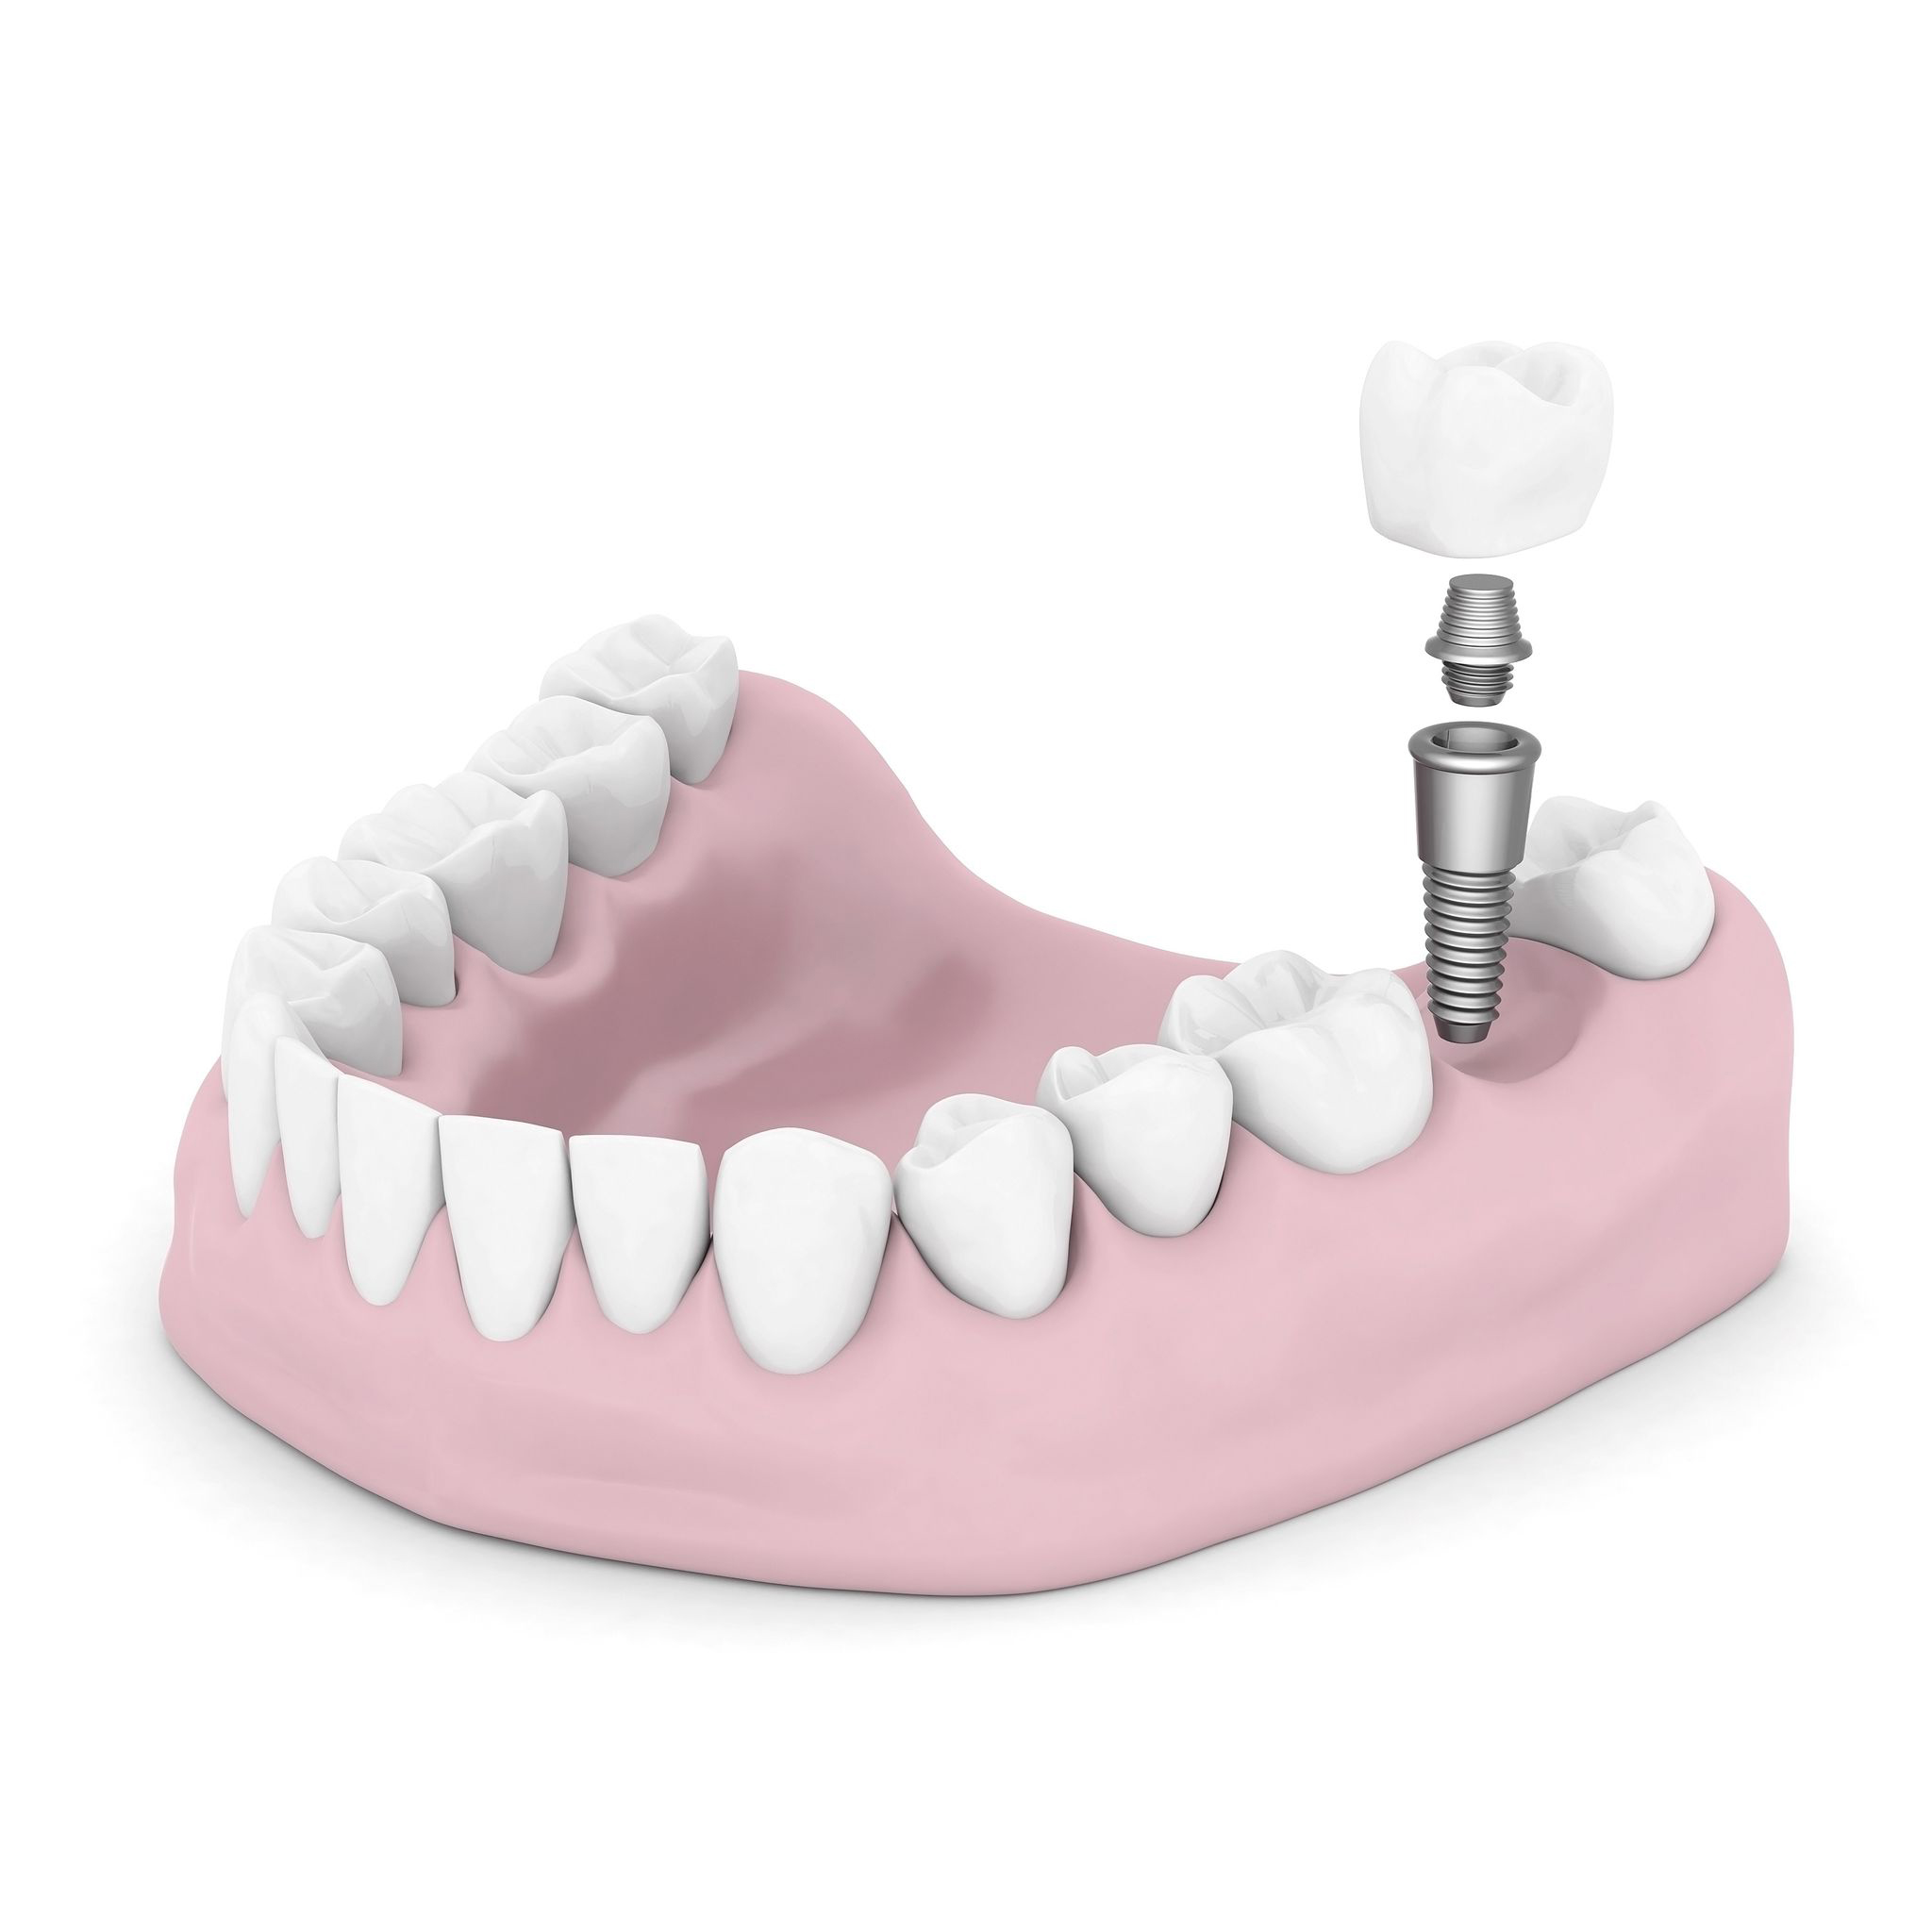 Where can I get Cypress Dental Implants?